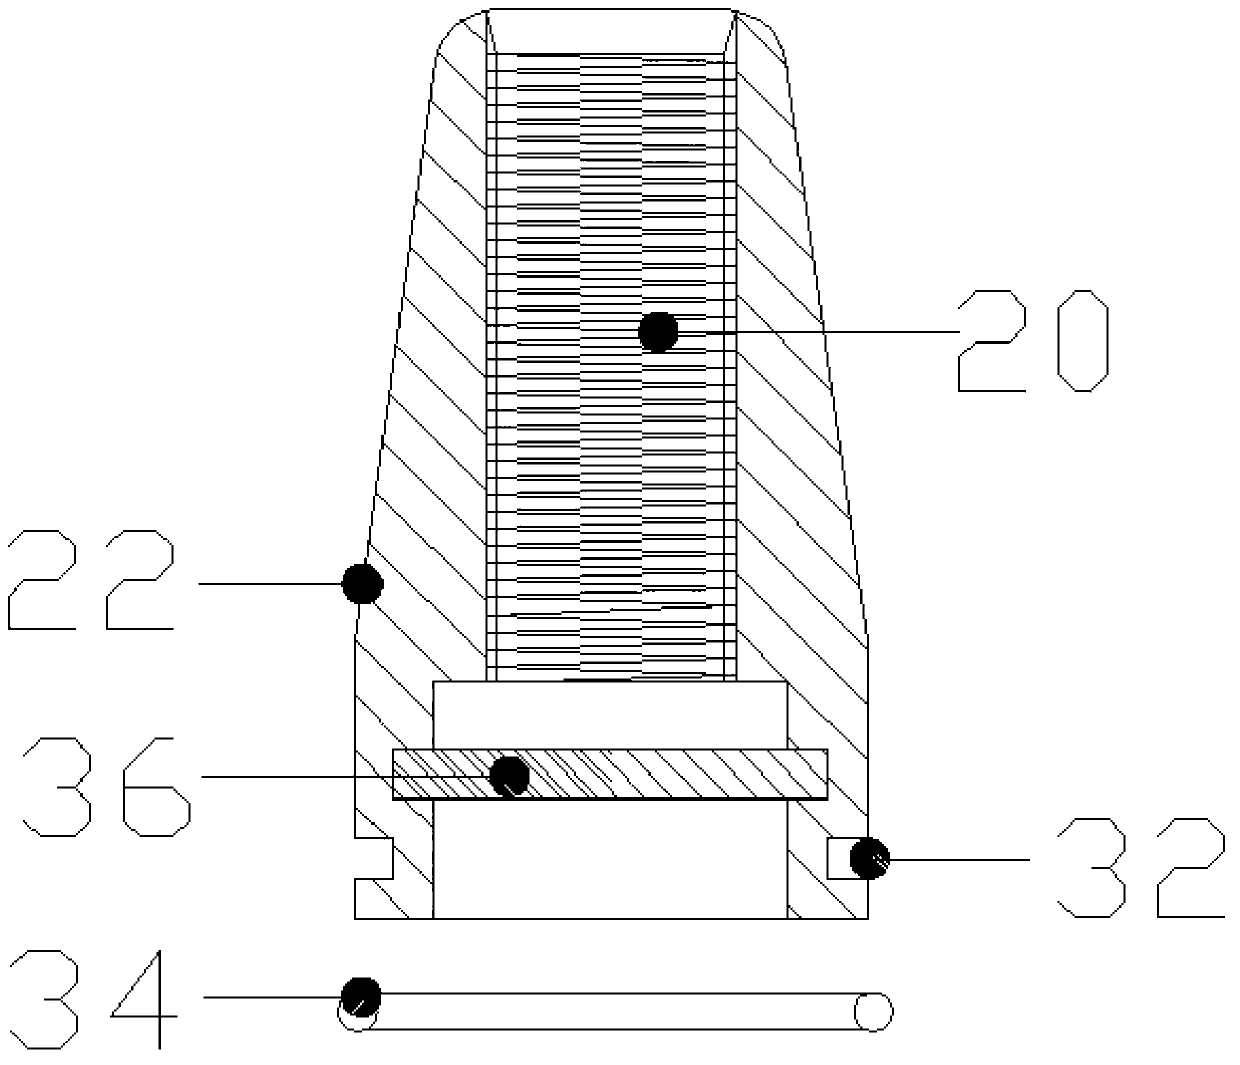 Removing type anchorage device